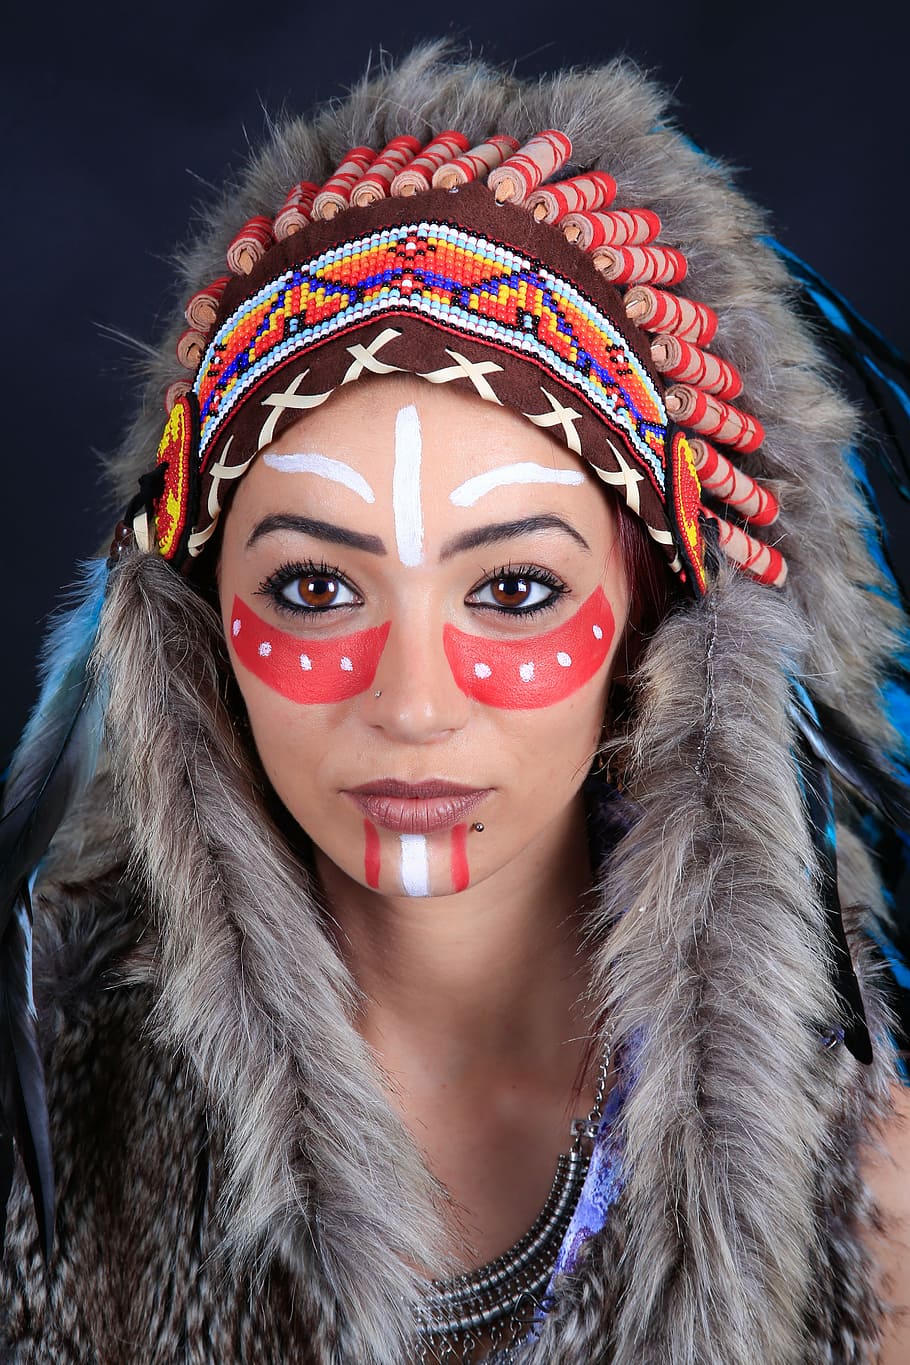 native american portrait, woman, feathers, young women, portrait, female, indian head, color, adults only, make-up